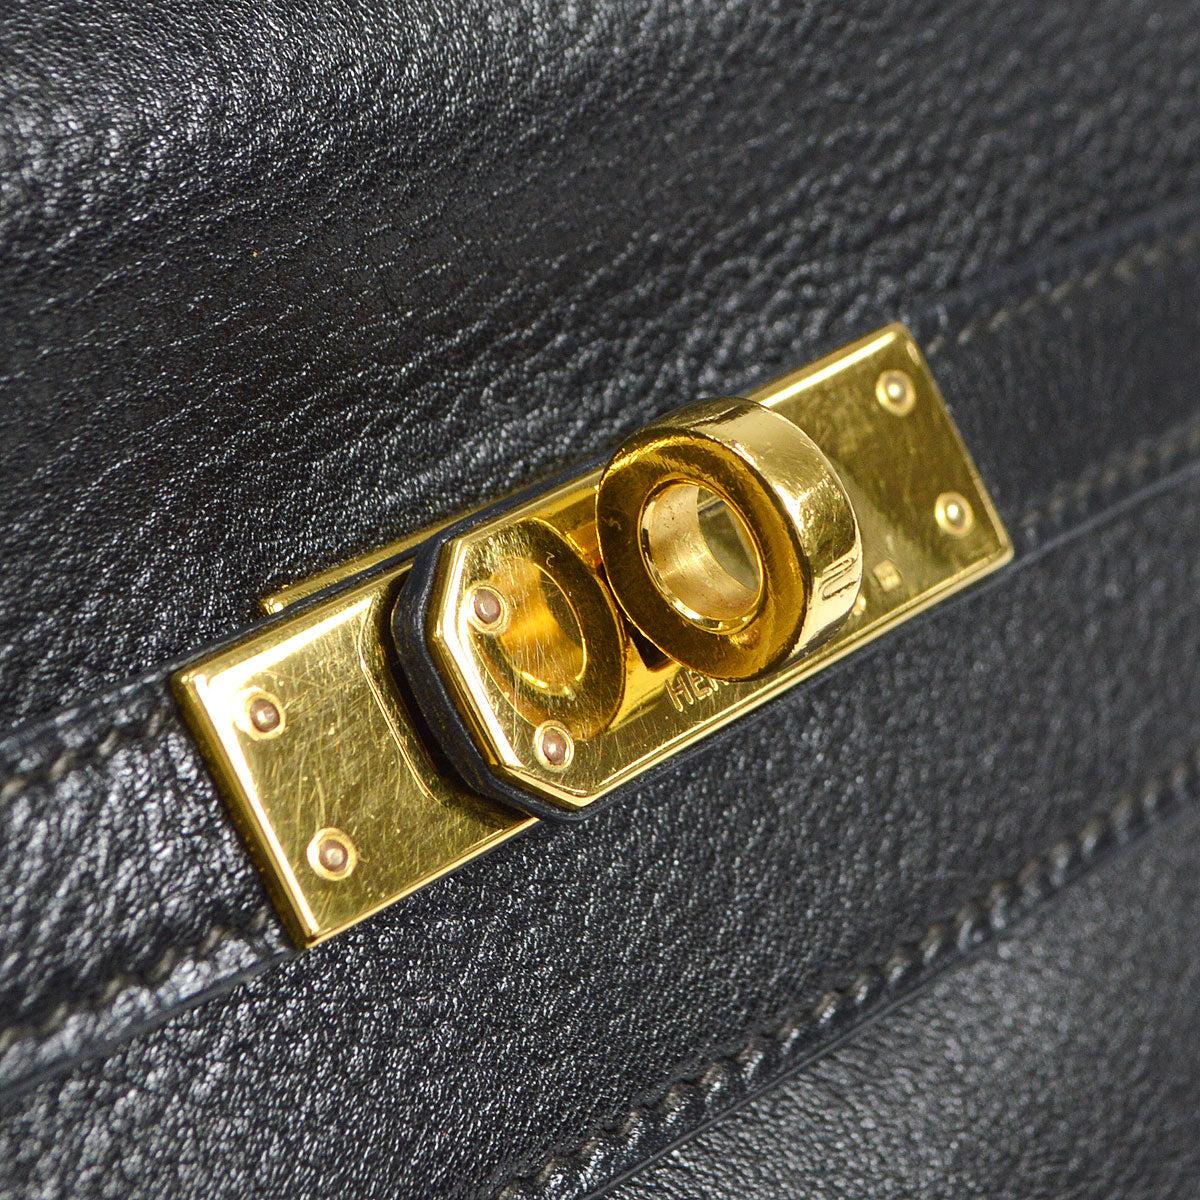 Pre-Owned Vintage Condition
From 1990 Collection
Veau Gulliver Leather
Gold Hardware

Includes Shoulder strap
W 7.5